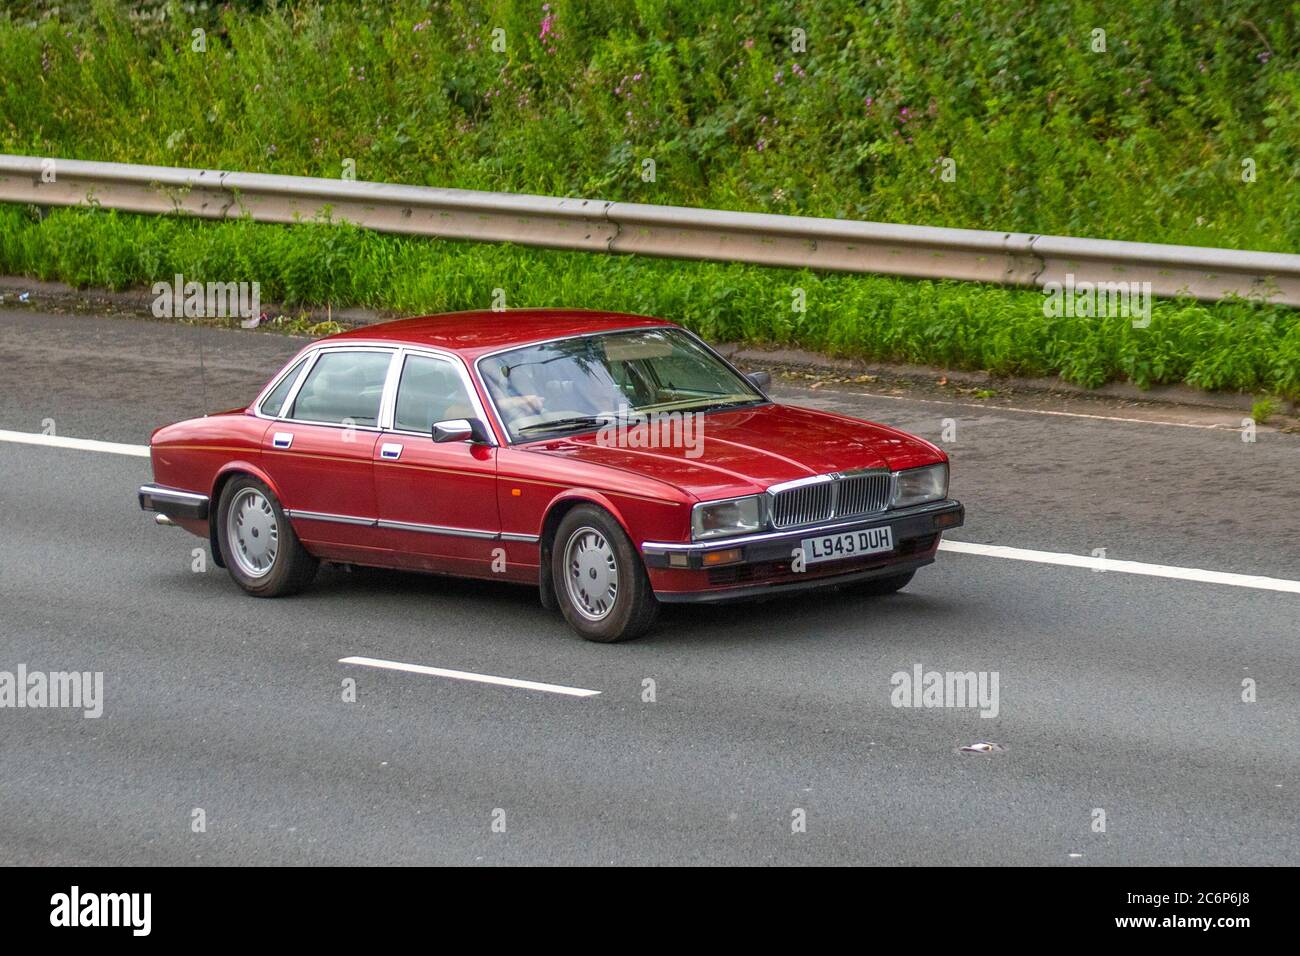 1994 90s nineties Red Jaguar Sovereign 4.0 Auto; Vehicular traffic moving vehicles, cars driving on UK roads, classic cars, cherished, veteran,  restored old timer vehicle, collectable motors, vintage, heritage, old preserved, collectable motors, motoring on the M6 motorway highway network. Stock Photo